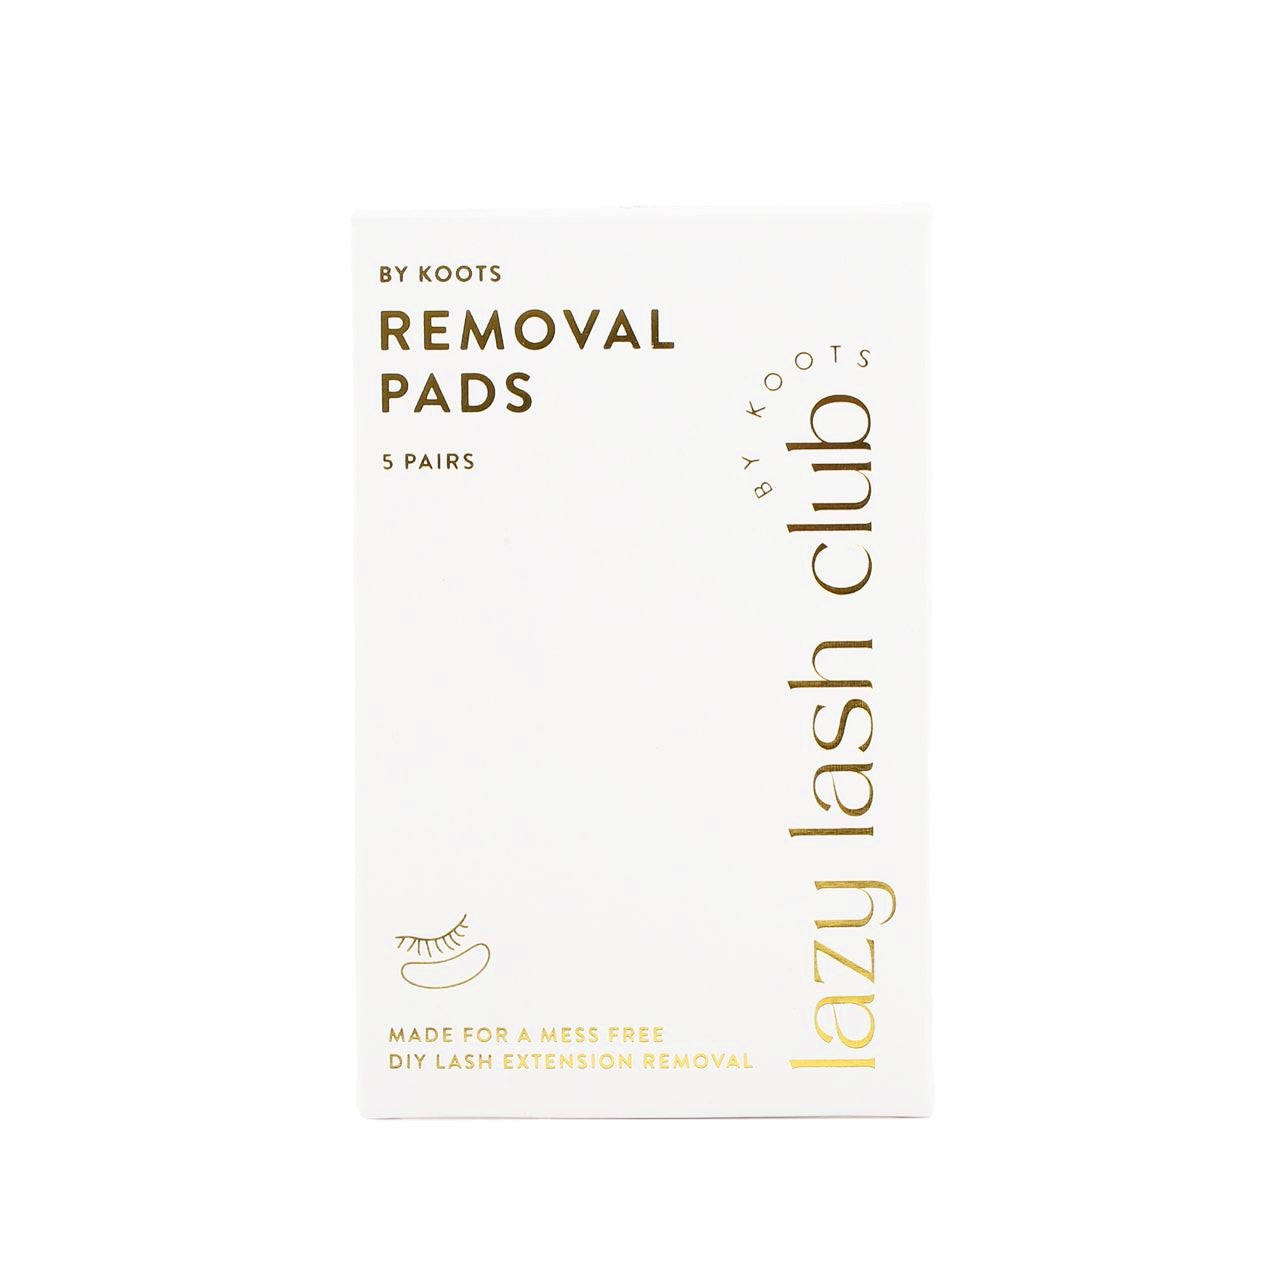 REMOVAL PADS | 5 PAIRS